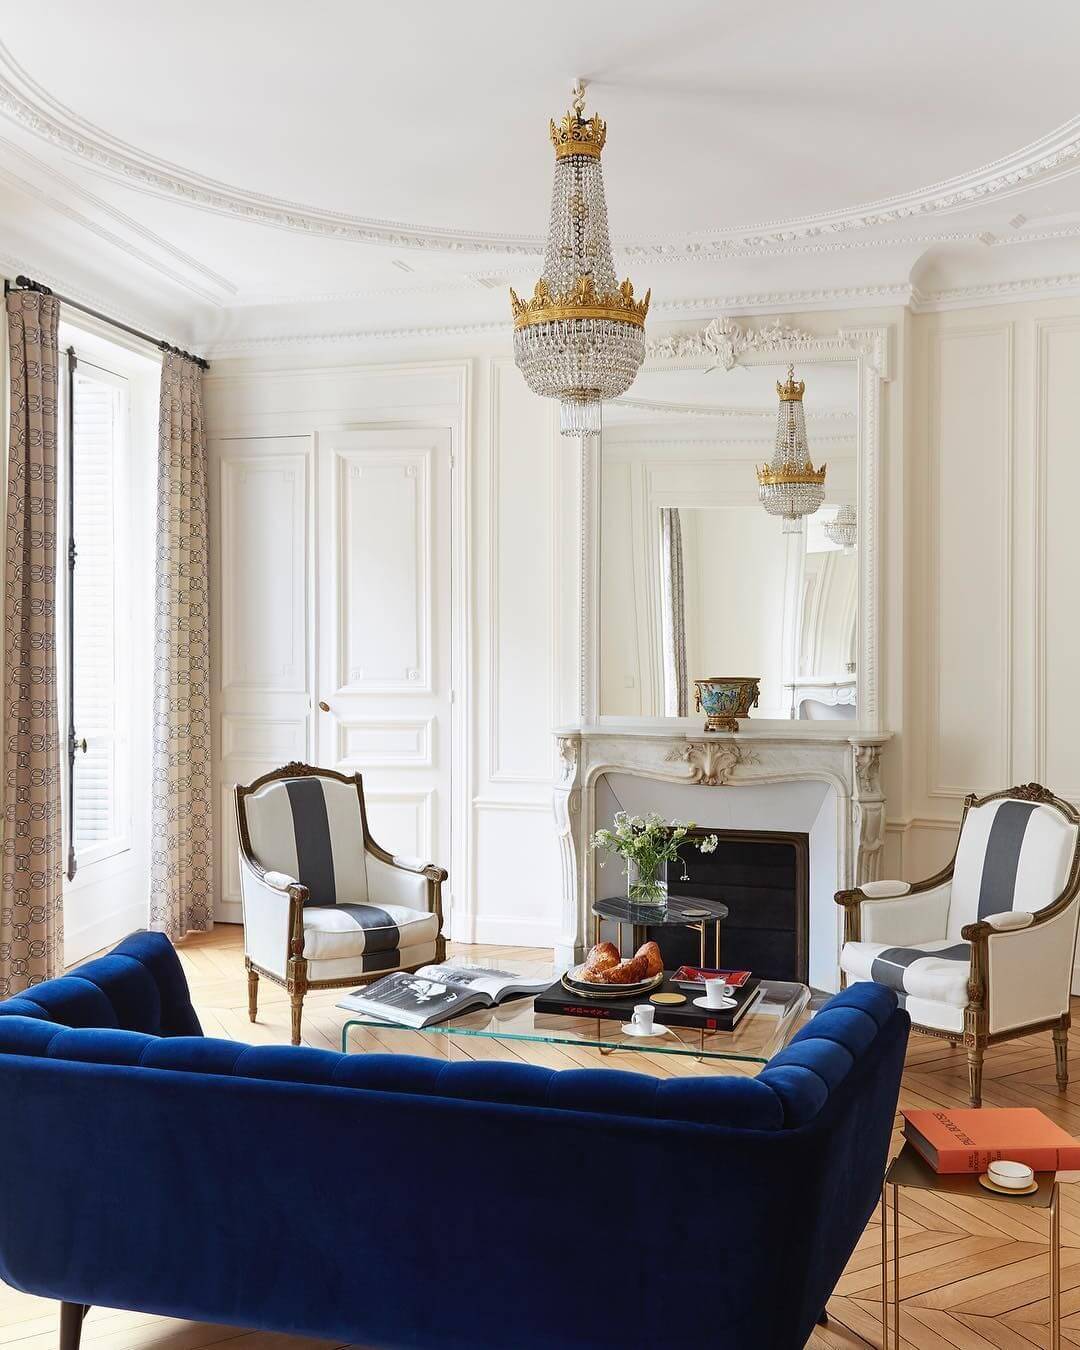 Parisian-living-room-with-blue-velvet-sofa-and-crystal-chandelier